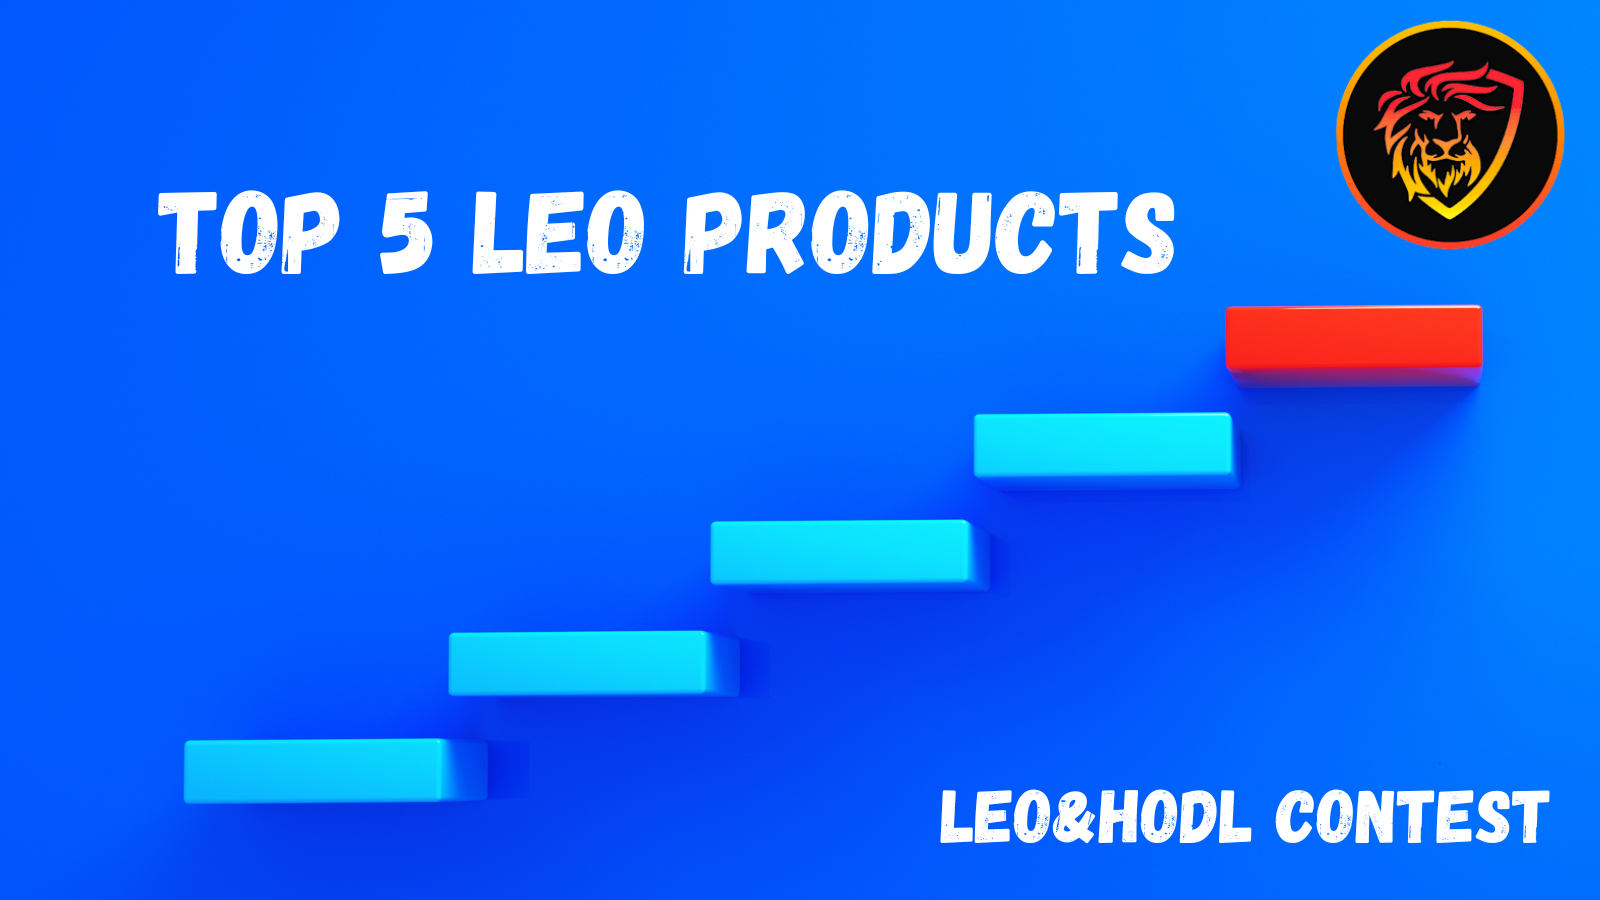 @idiosyncratic1/leo-and-hodl-contest-focus-top-5-leo-products